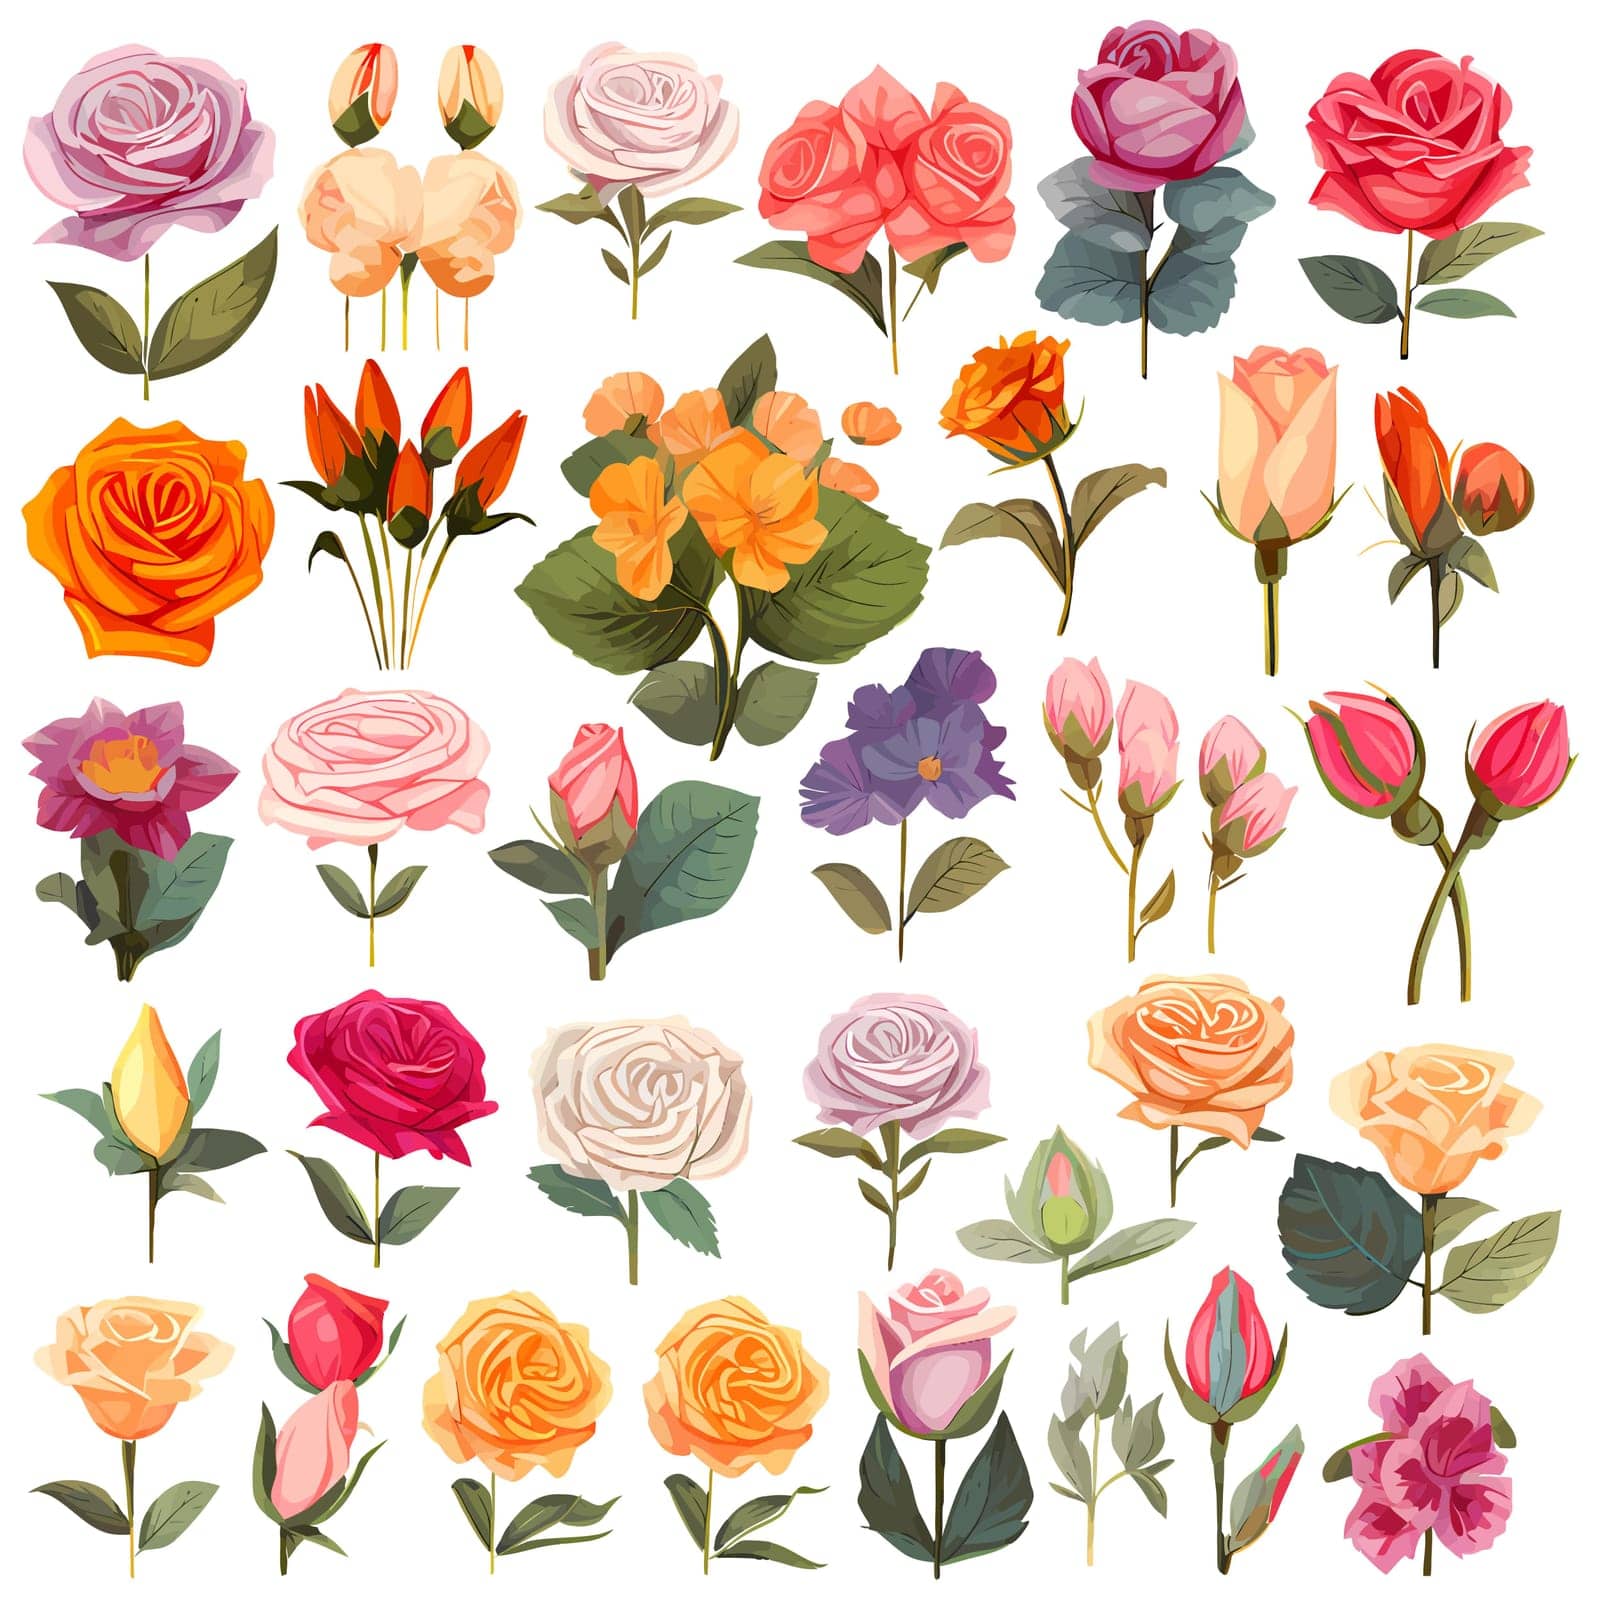 Flower icons set. Collection of colorful flowers on white background. Various flowers in flat design. Vector illustration